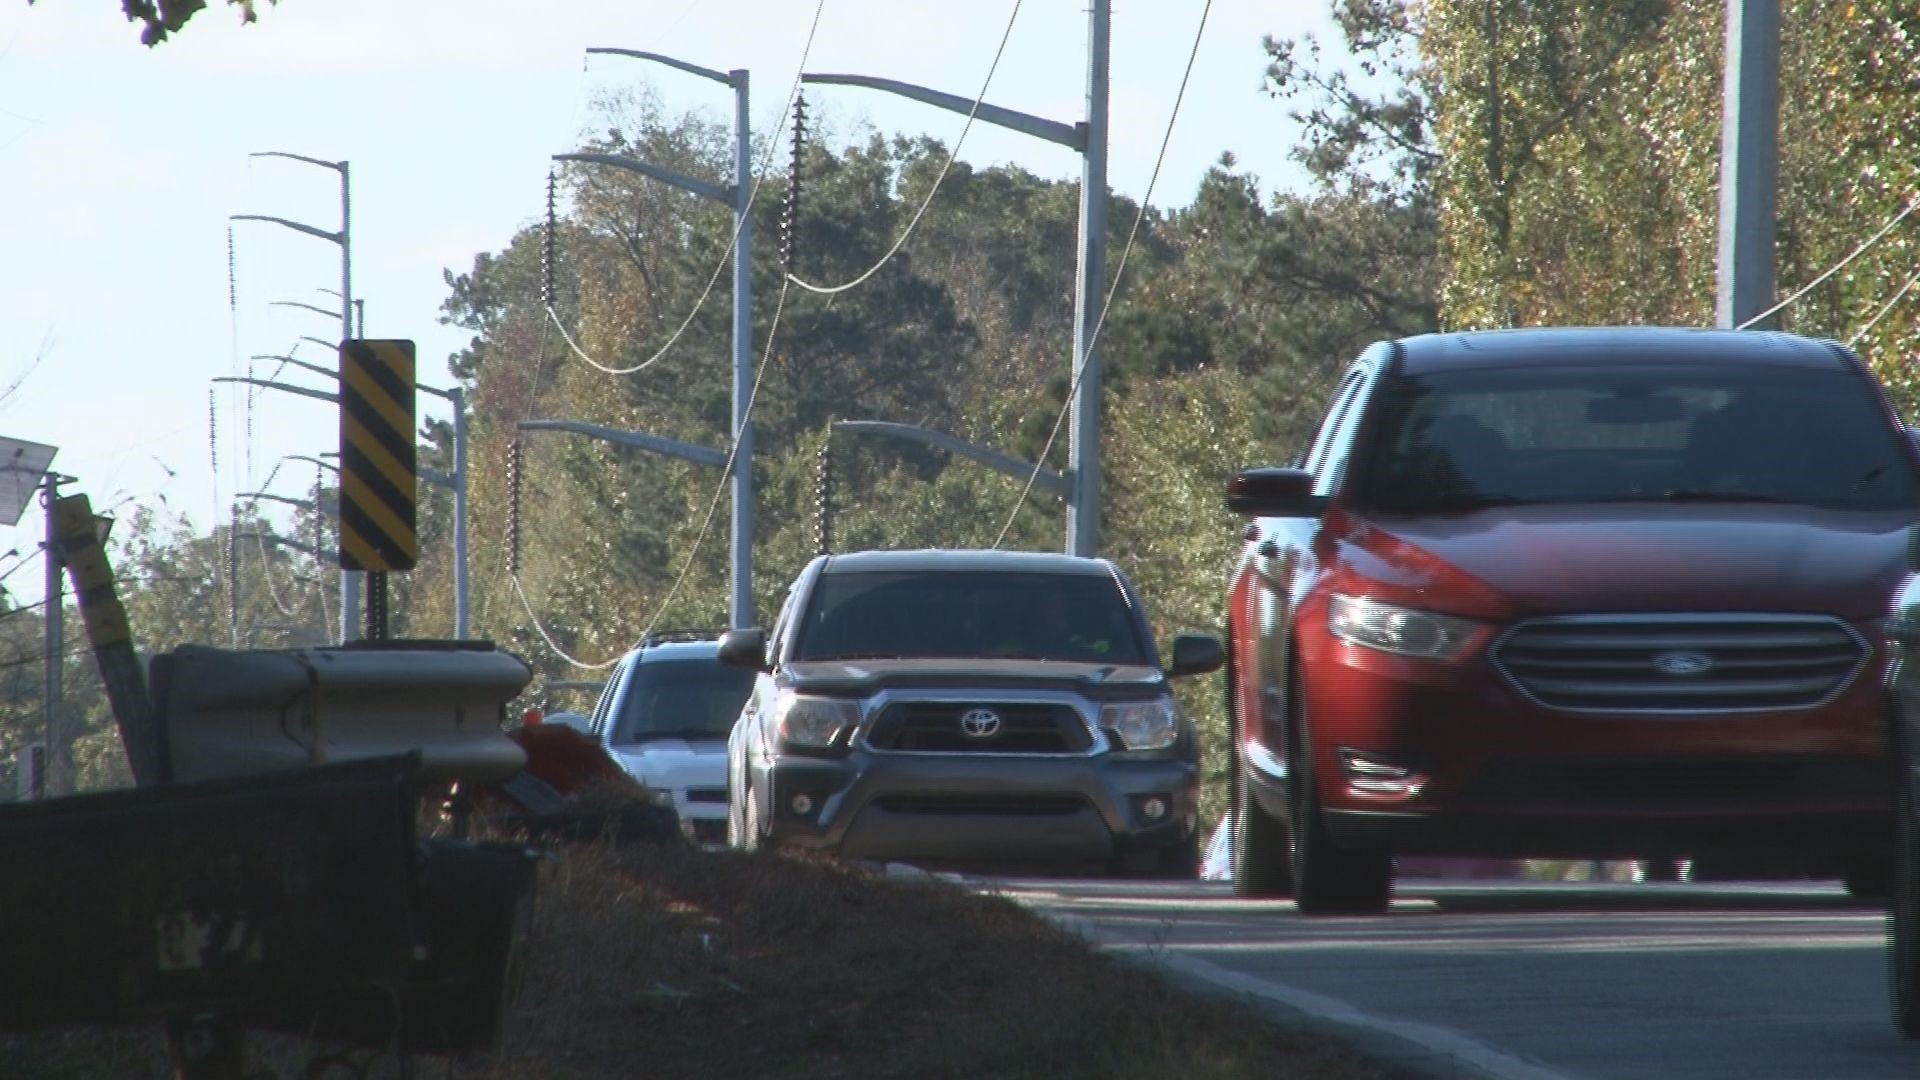 A north Macon man says the concrete barrier on the Bass Road bridge near Rivoli Drive is making an already narrow road even more dangerous.